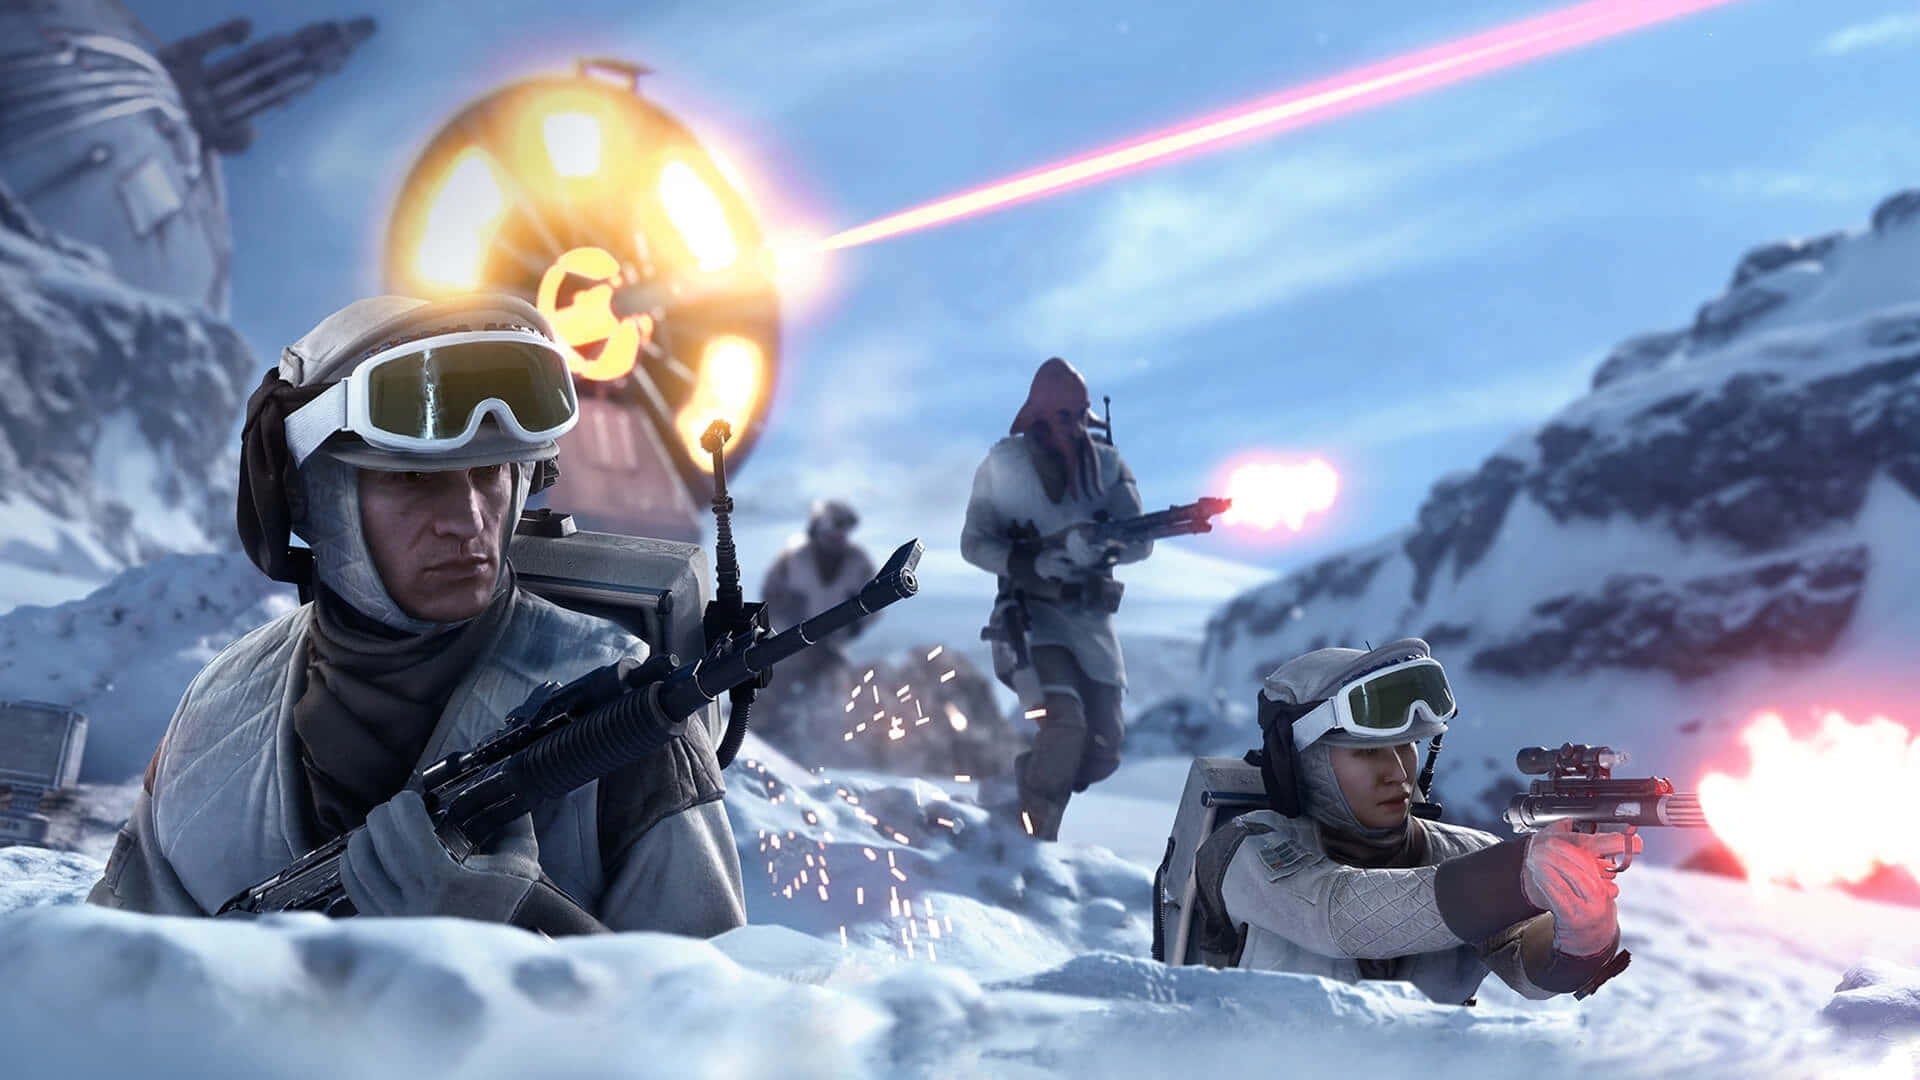 Imperial forces clash with the Rebel Alliance in the epic Battle of Hoth" Wallpaper